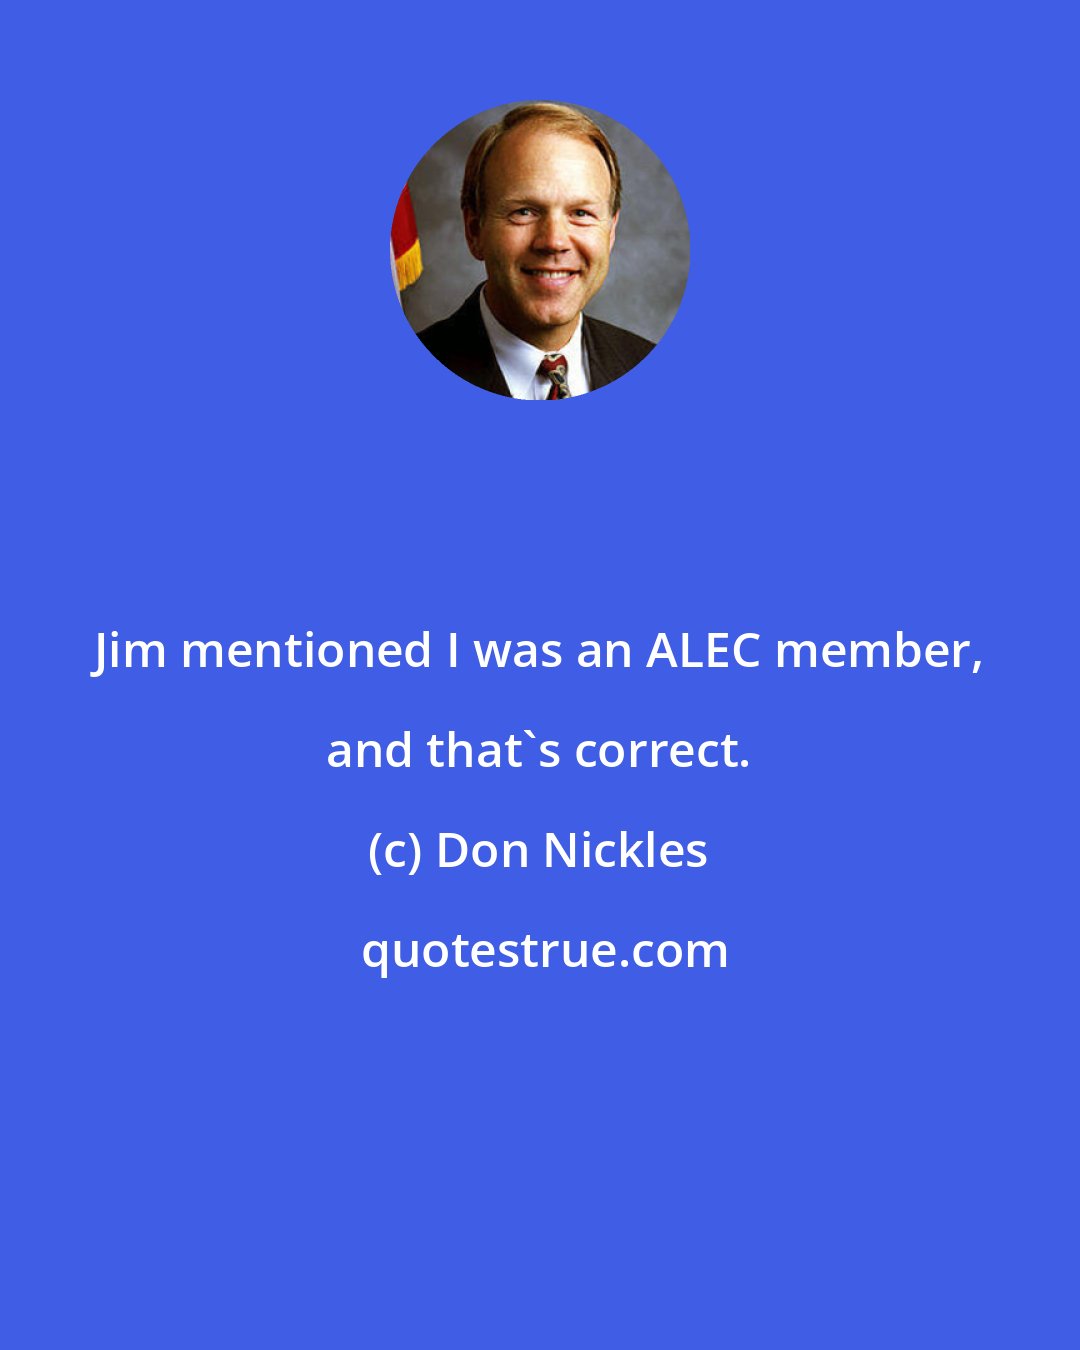 Don Nickles: Jim mentioned I was an ALEC member, and that's correct.